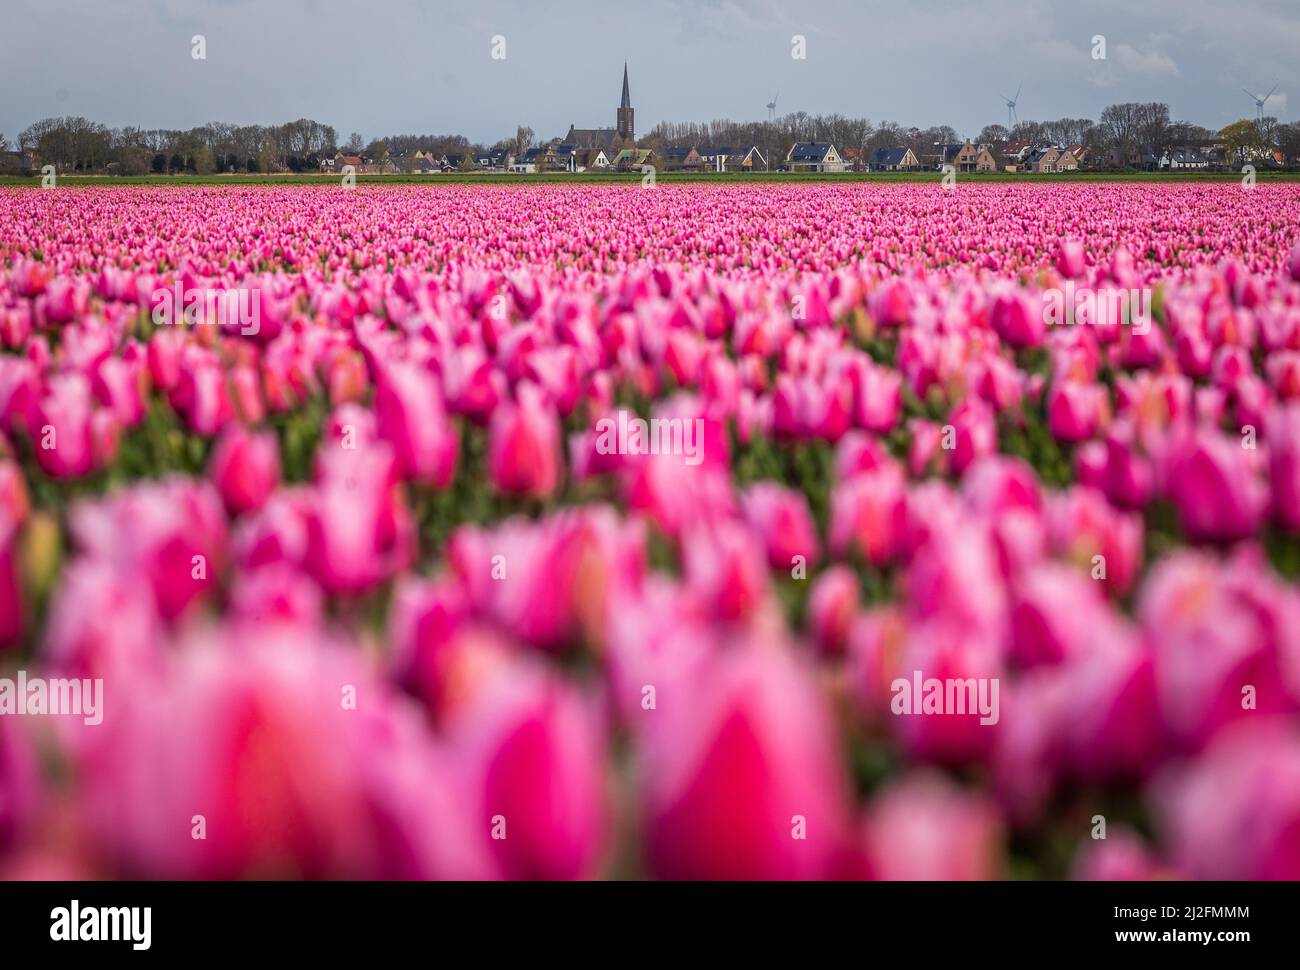 2022-03-31 08:07:43 31-03-2022, Zuid-Beijerland - Tulip fields in bloom on a field in Zuid-Beijerland. The tulips bloom early this year due to the beautiful sunny weather. Photo: ANP / Hollandse Hoogte / Jeffrey Groeneweg netherlands out - belgium out Stock Photo